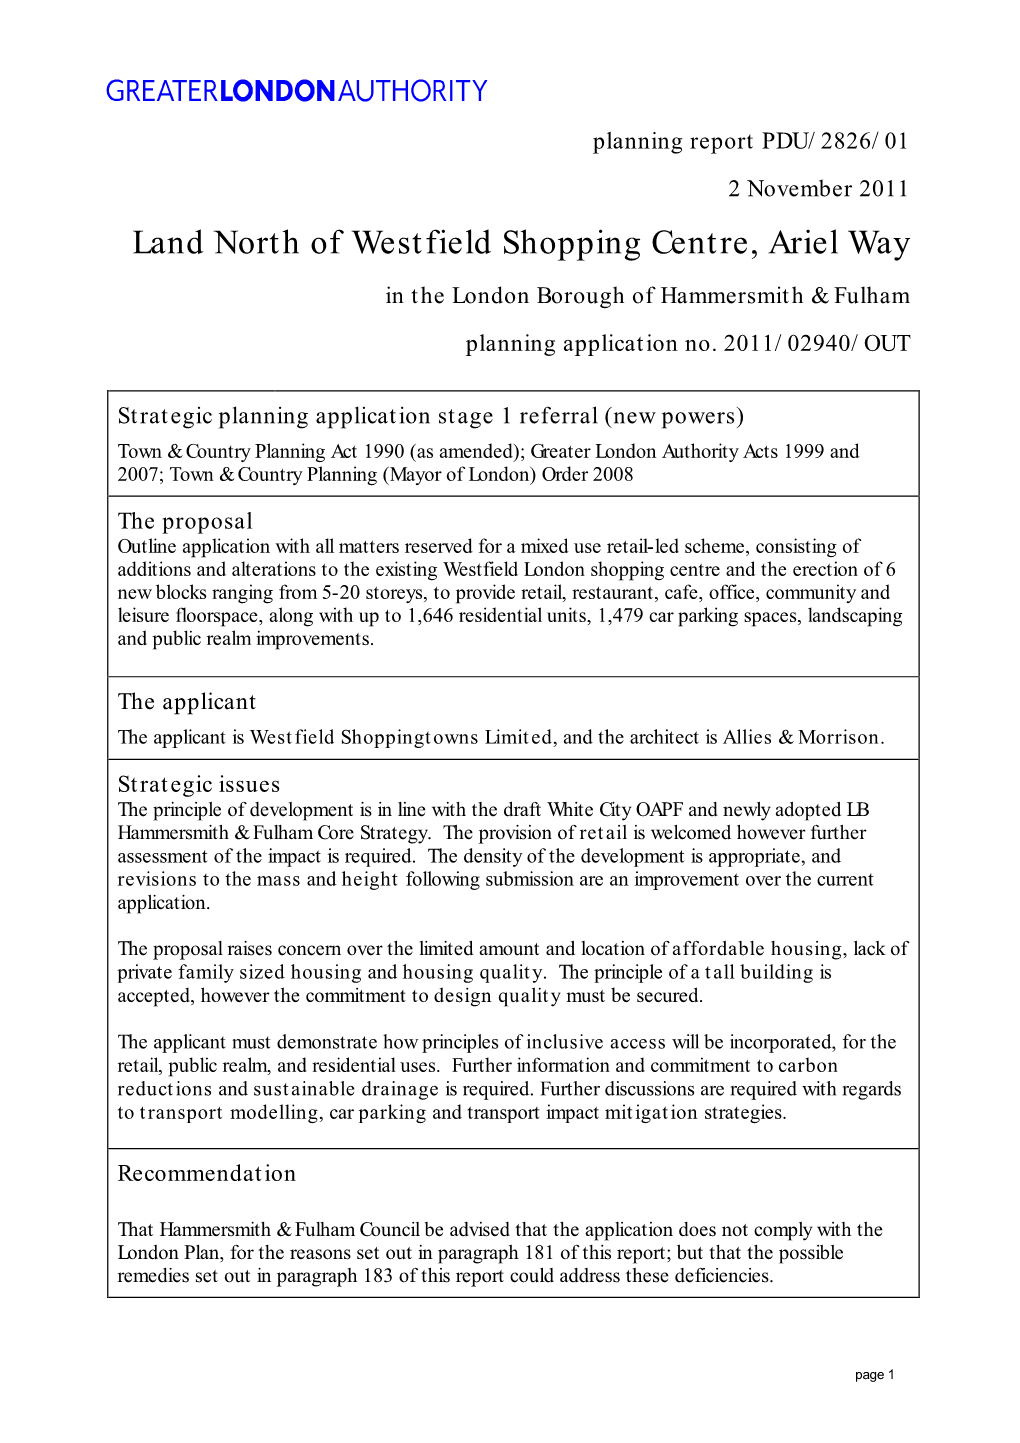 Land North of Westfield Shopping Centre, Ariel Way in the London Borough of Hammersmith & Fulham Planning Application No